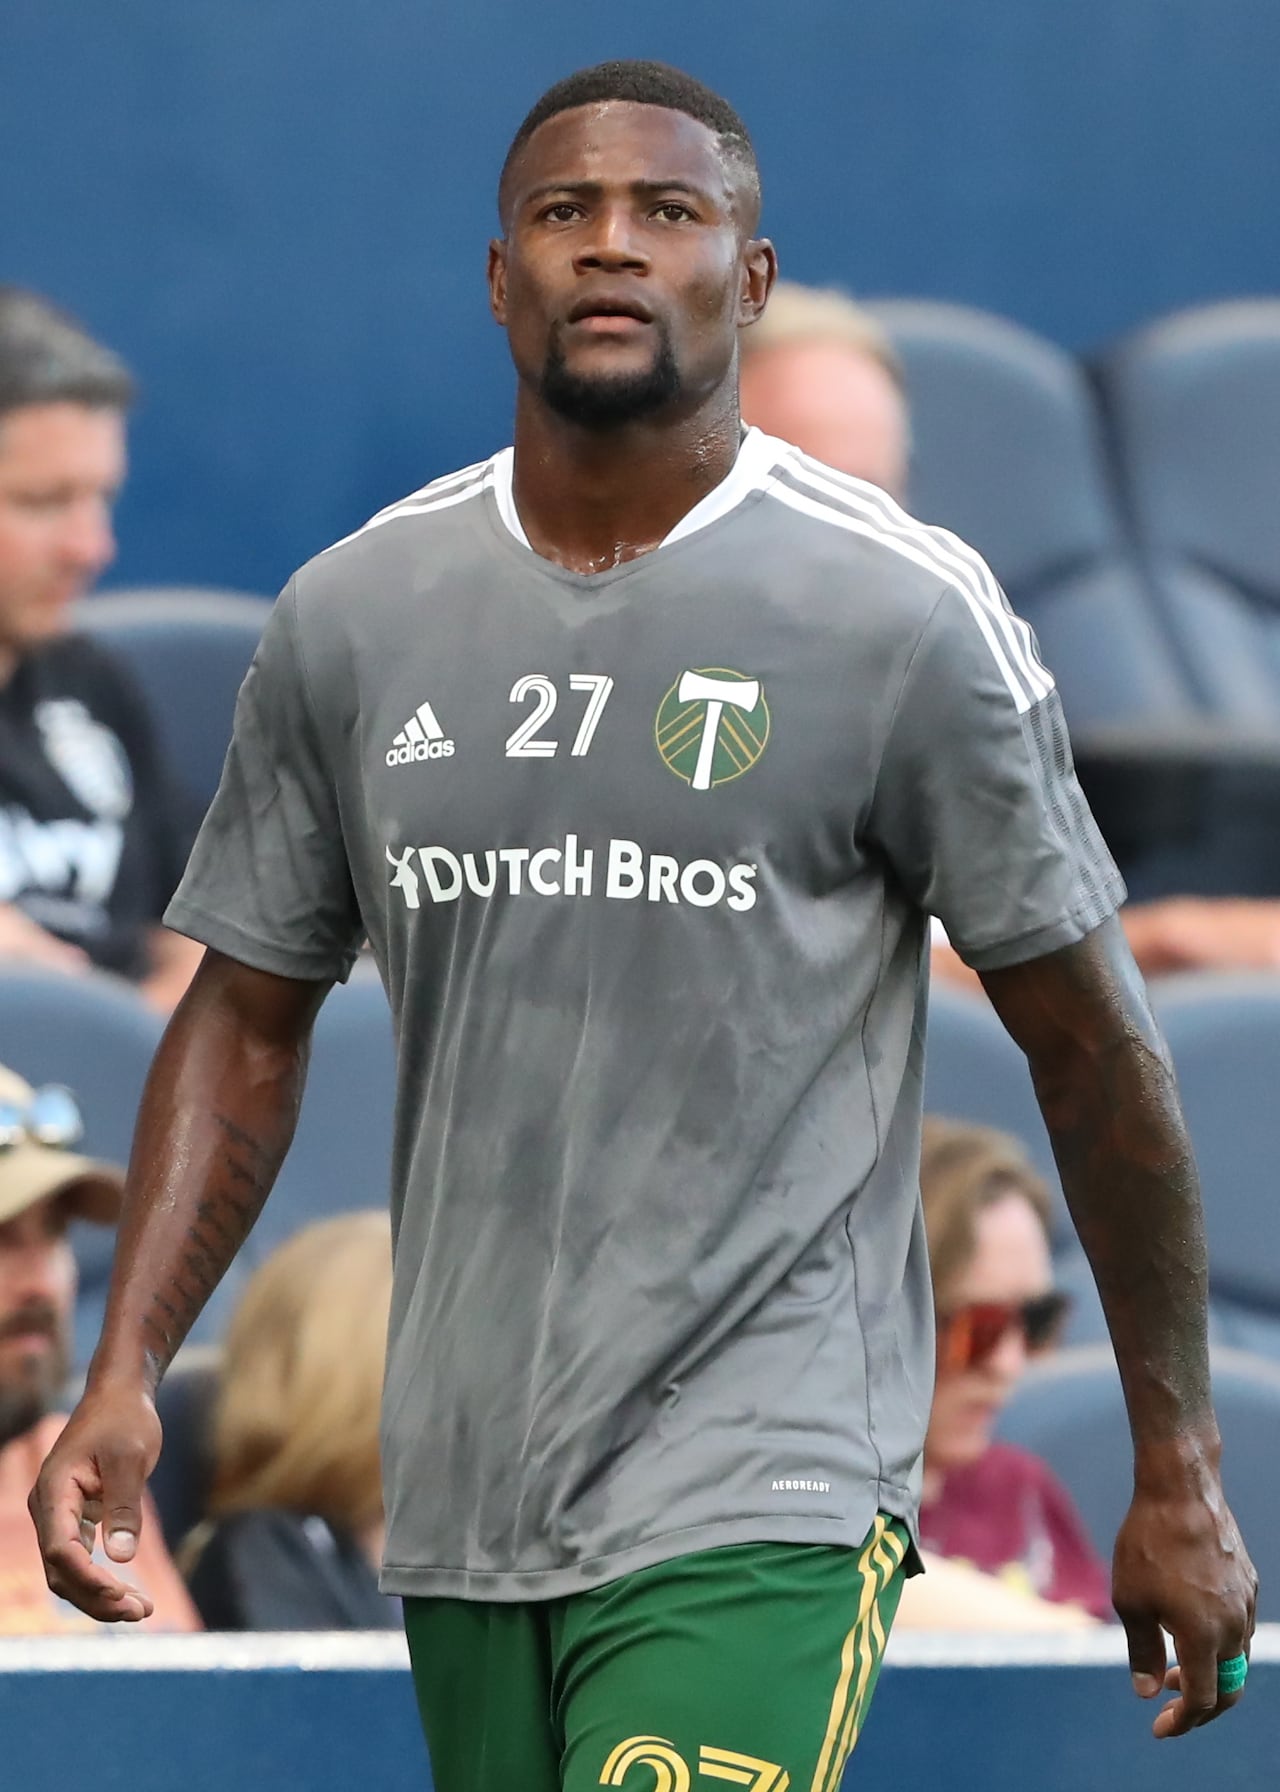 KANSAS CITY, KS - AUGUST 18: Portland Timbers forward Dairon Asprilla (27) before an MLS match between the Portland Timbers and Sporting KC on Aug 18, 2021 at Children's Mercy Park in Kansas City, KS. (Photo by Scott Winters/Icon Sportswire via Getty Images)